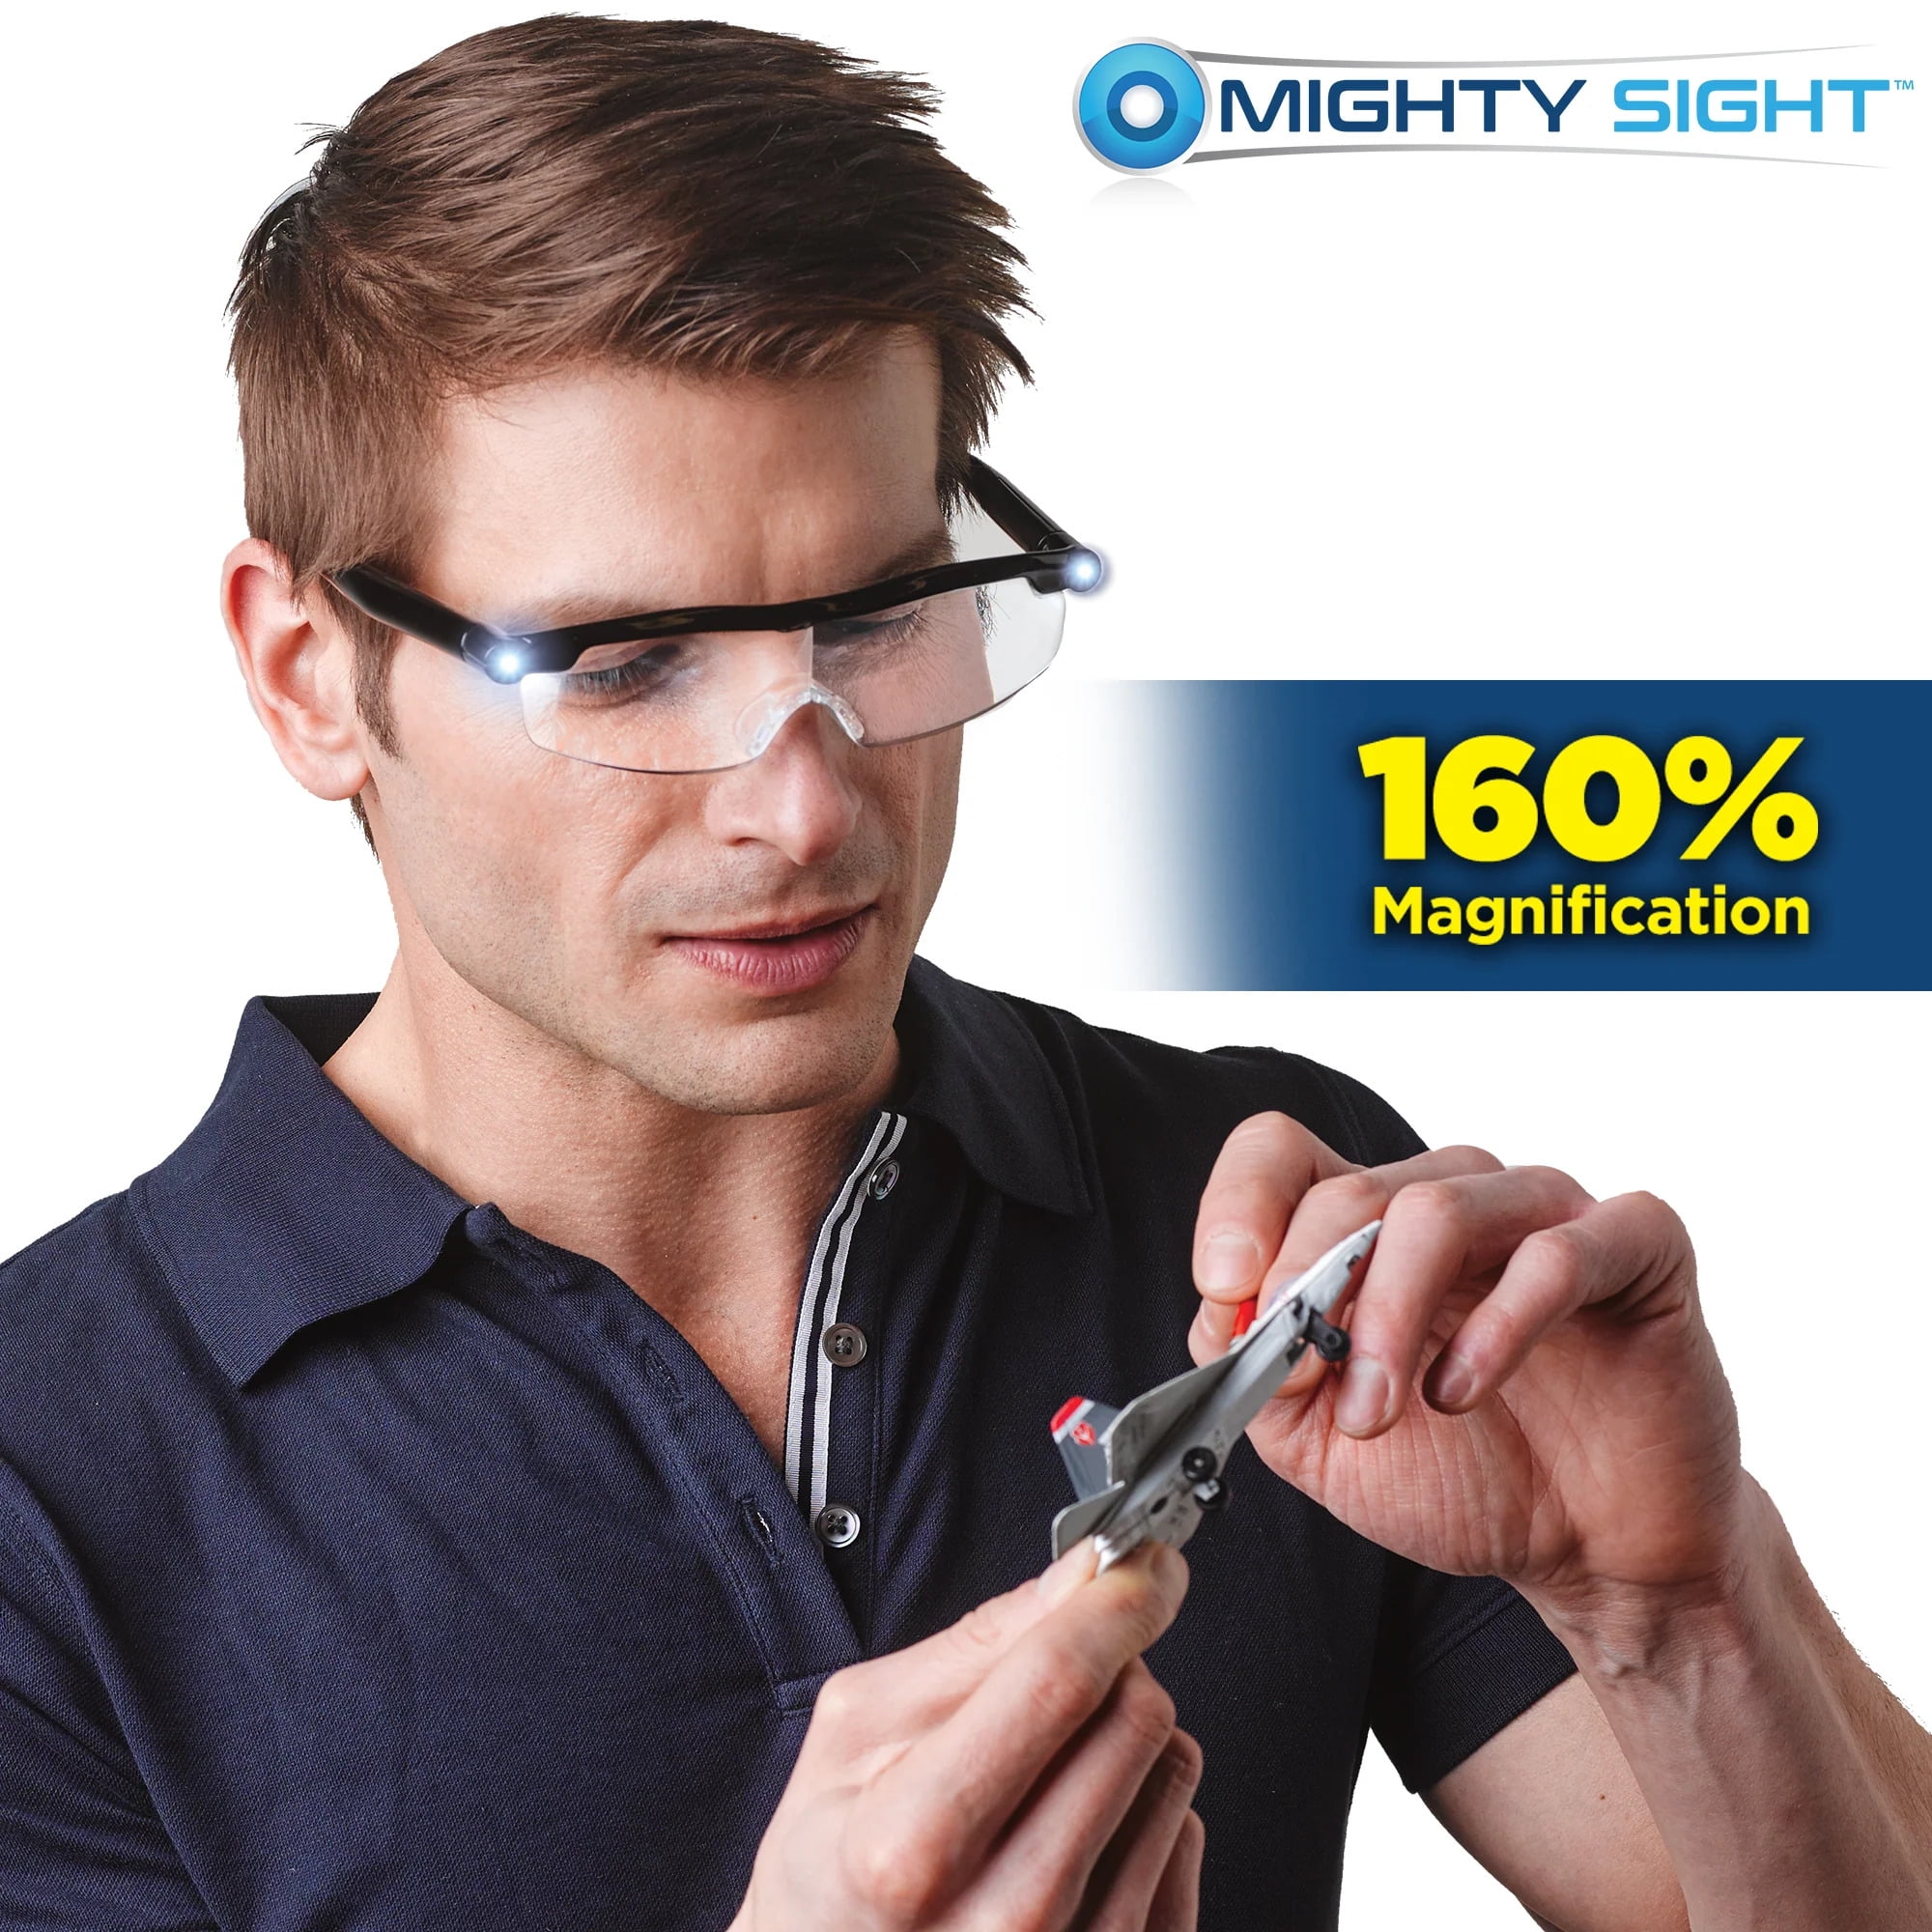 Mighty Sight LED Magnifying Glasses Fits over Prescription Eyewear